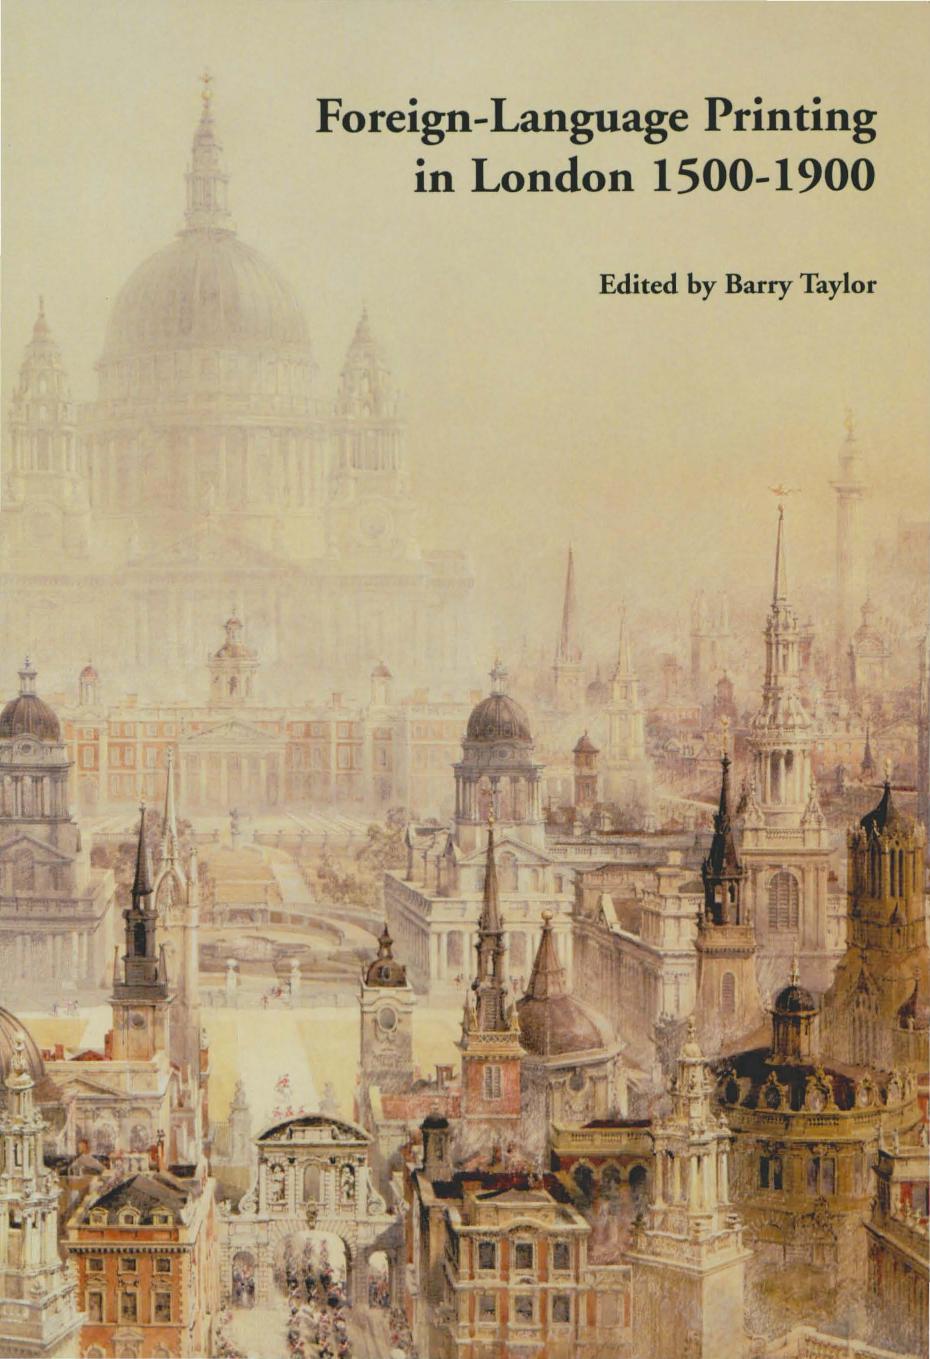 Foreign-Language Printing in London 1500-1900 by Barry Taylor